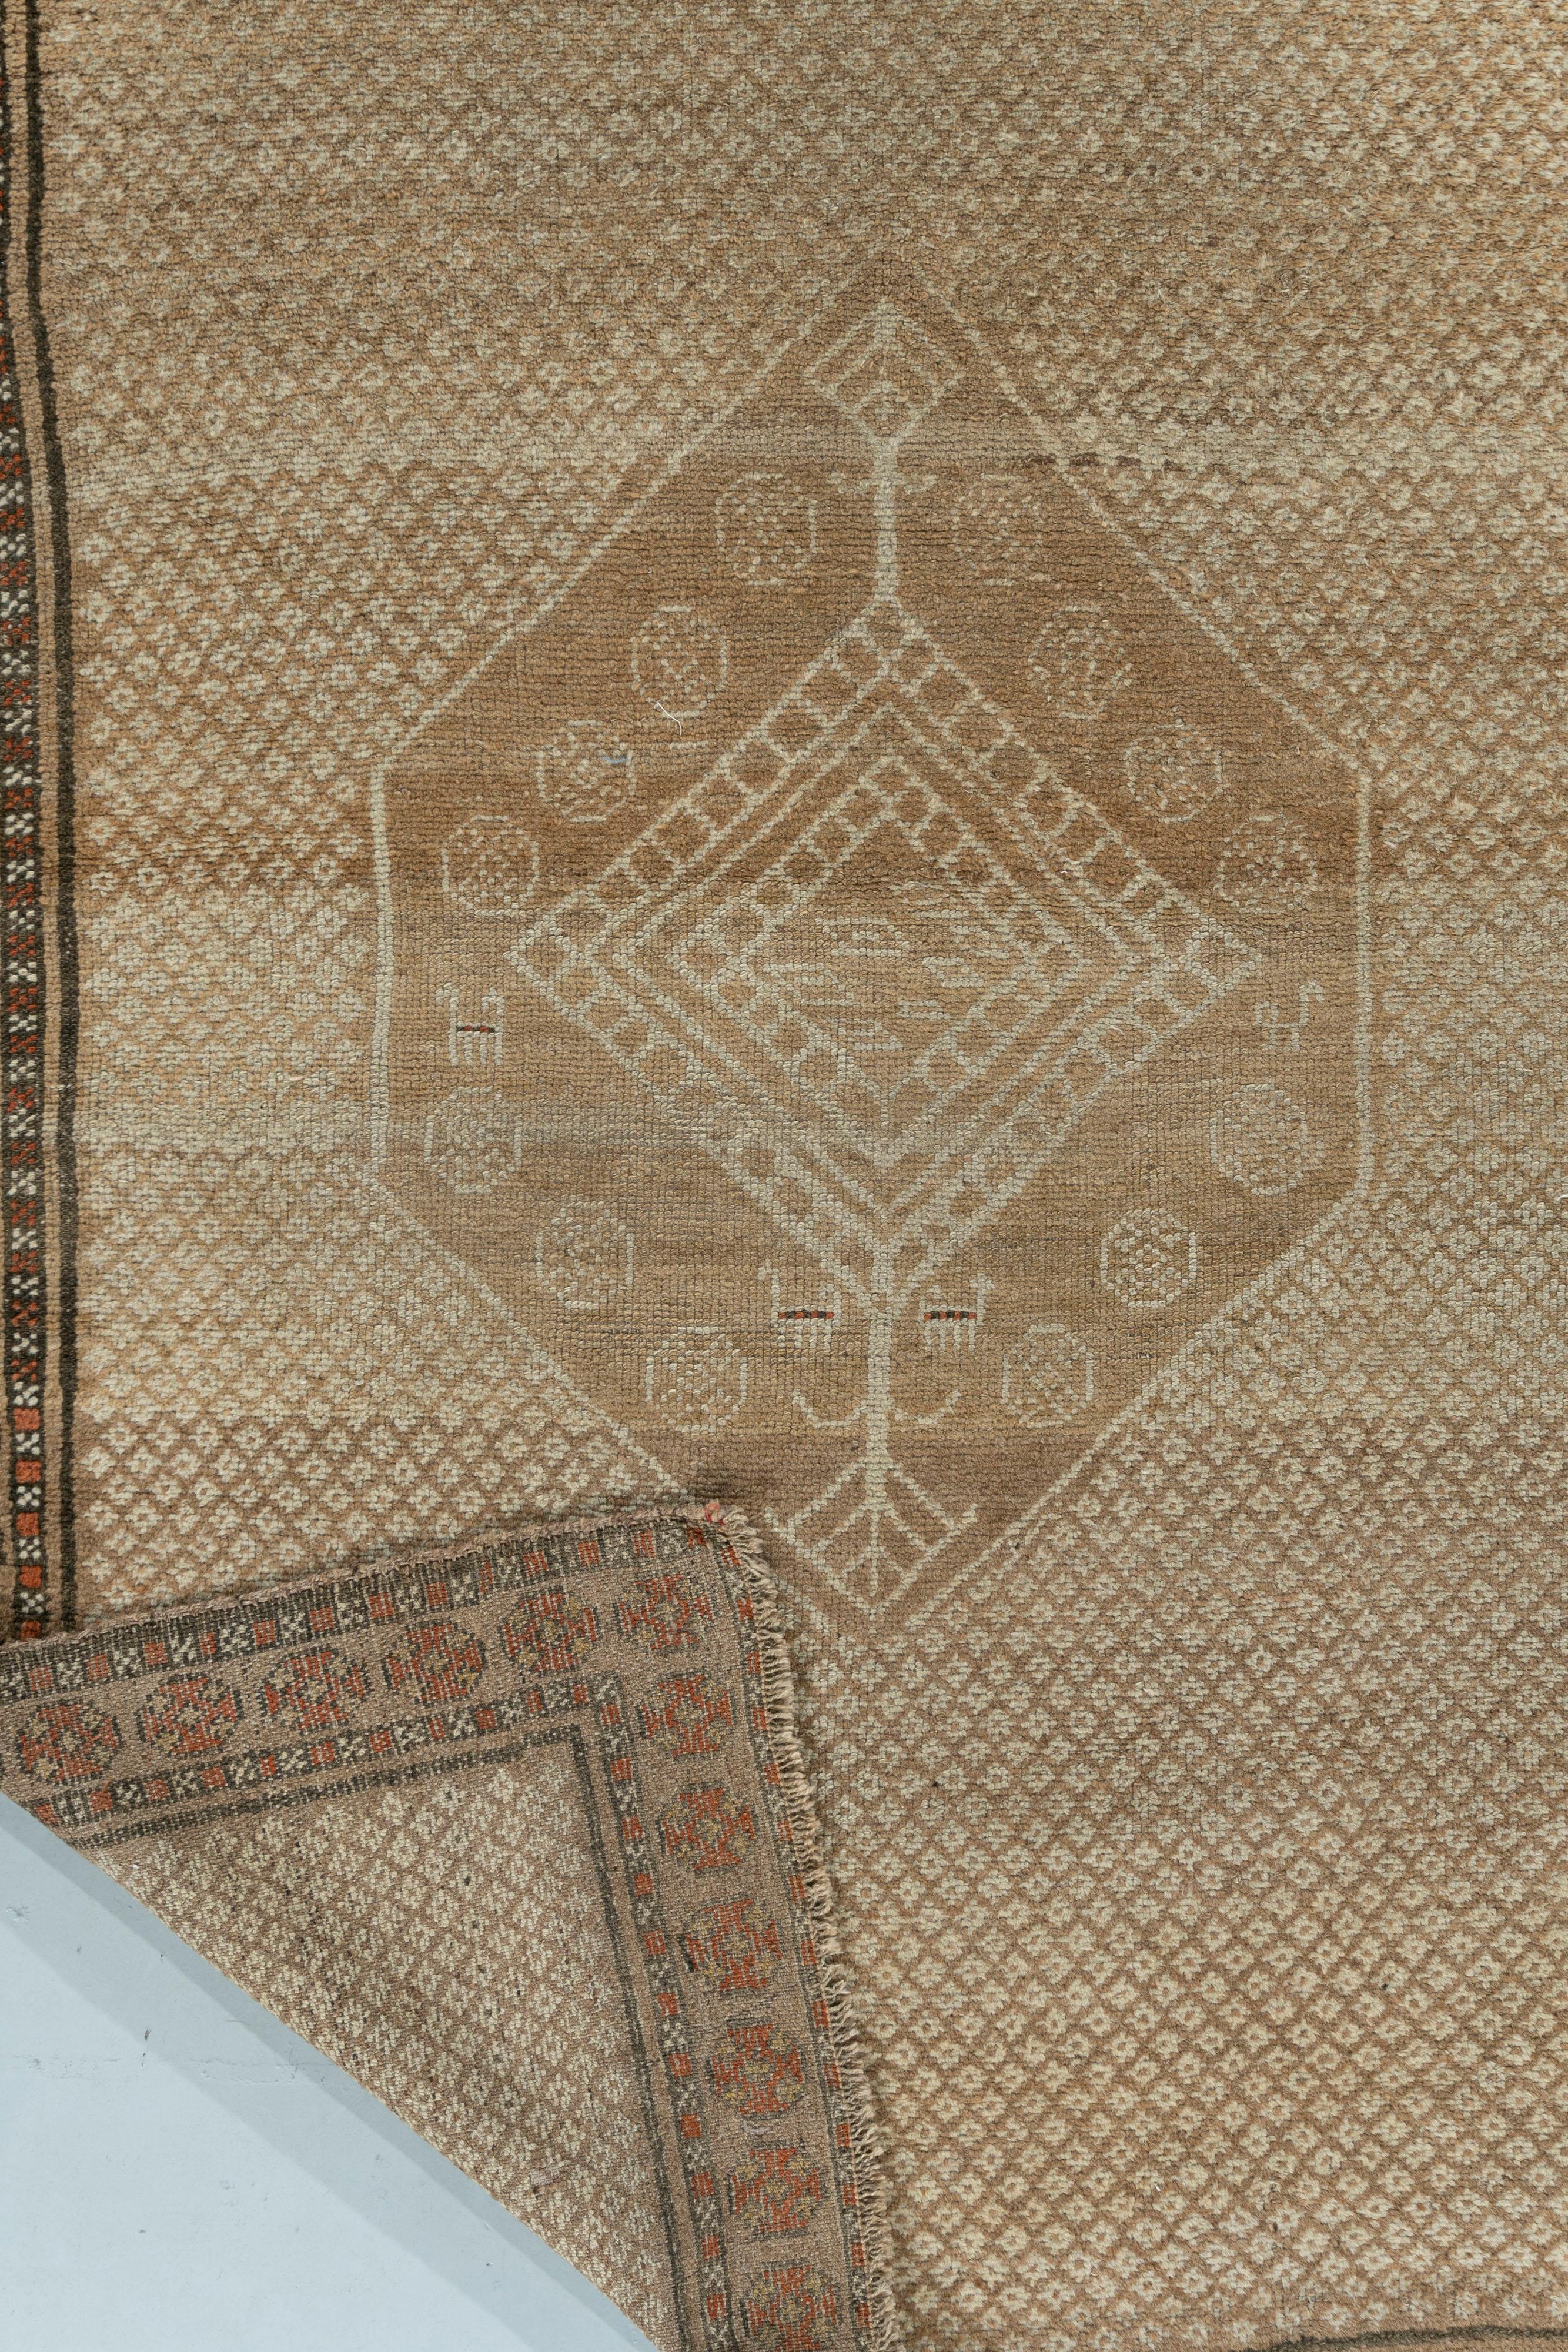 Vintage Persian Serab rug 4'4 x 6'10. A lovely light and airy Serab rug with a camel ground. Serab is located on the edge of the Heriz weaving area, camel borders and fields are standard on antique Serab rugs. The patterns are geometric, the wool